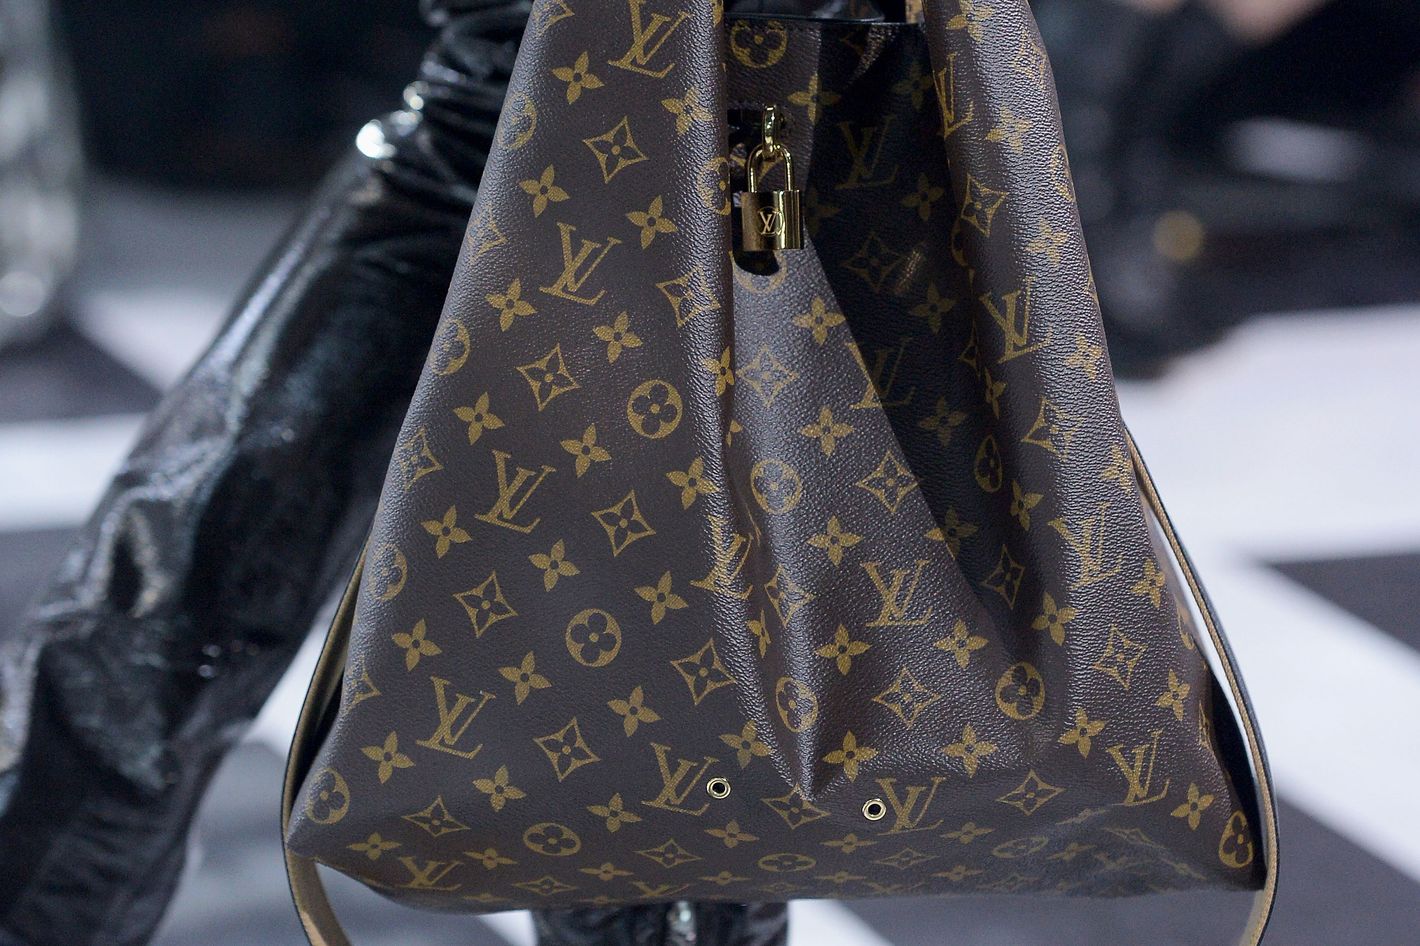 Louis Vuitton: What to remember from the Louis Vuitton fashion